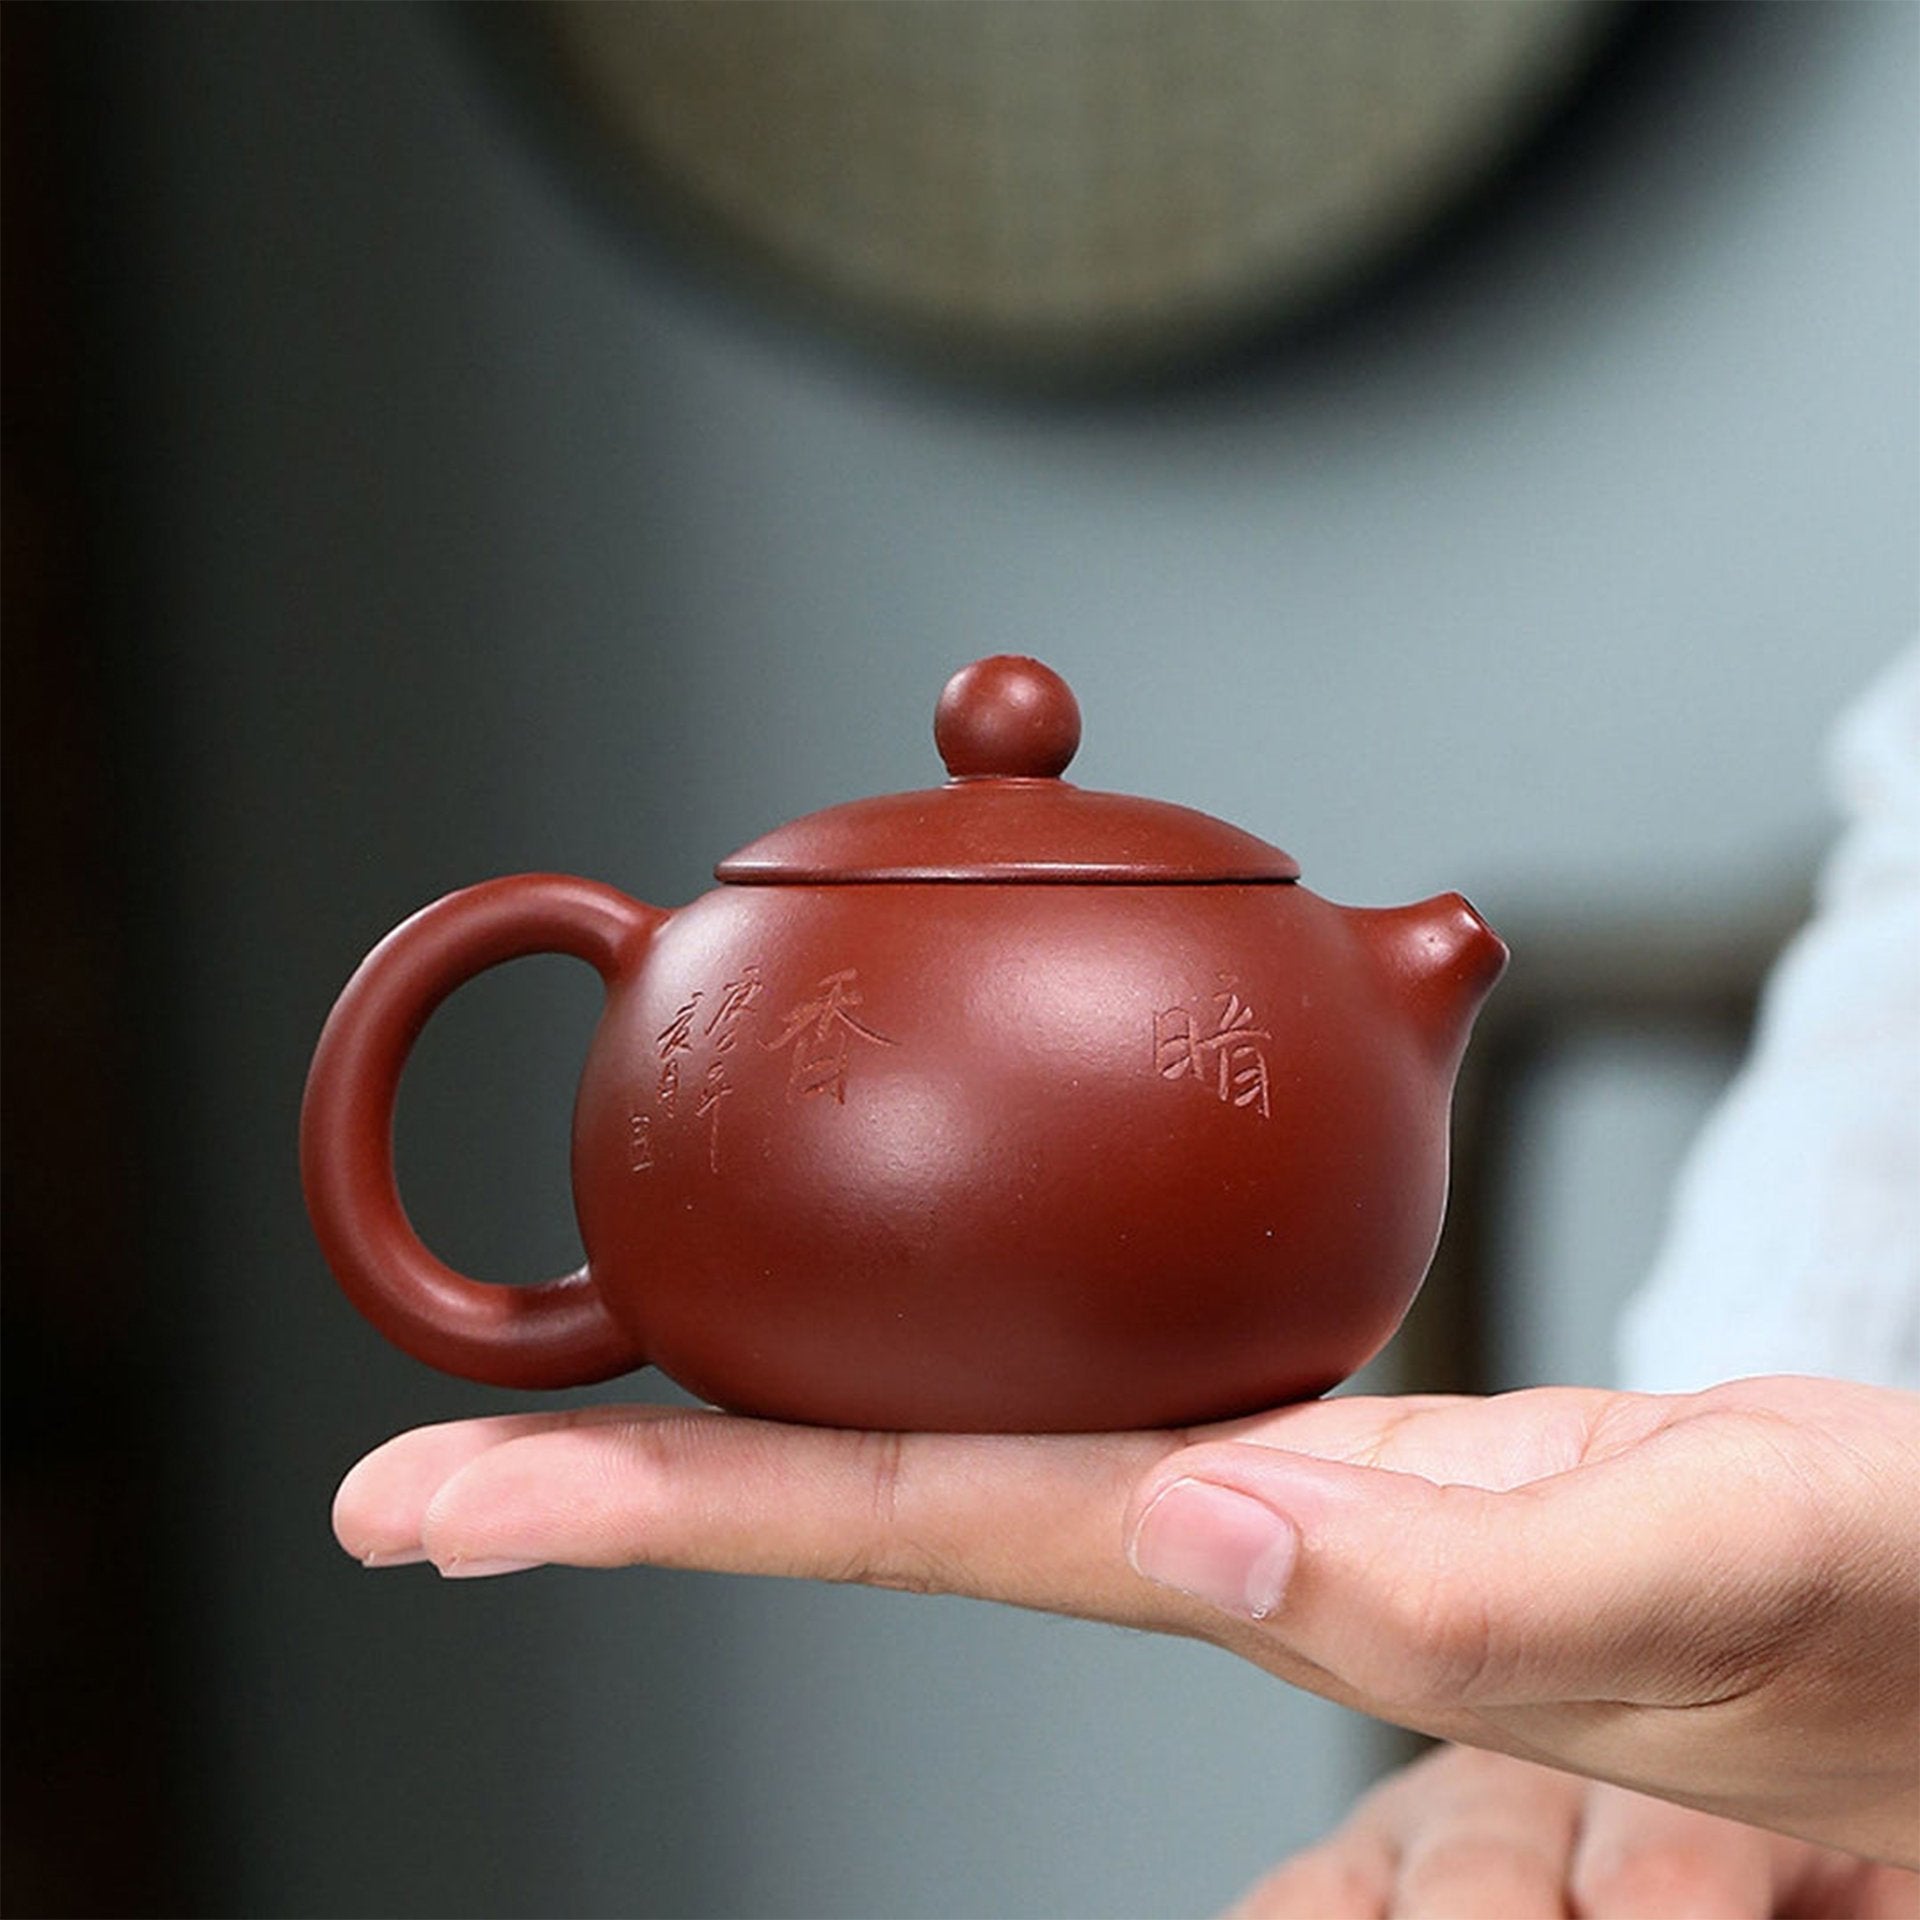 Woman holding a red teapot open, emphasizing the teapot's inner markings and quality.